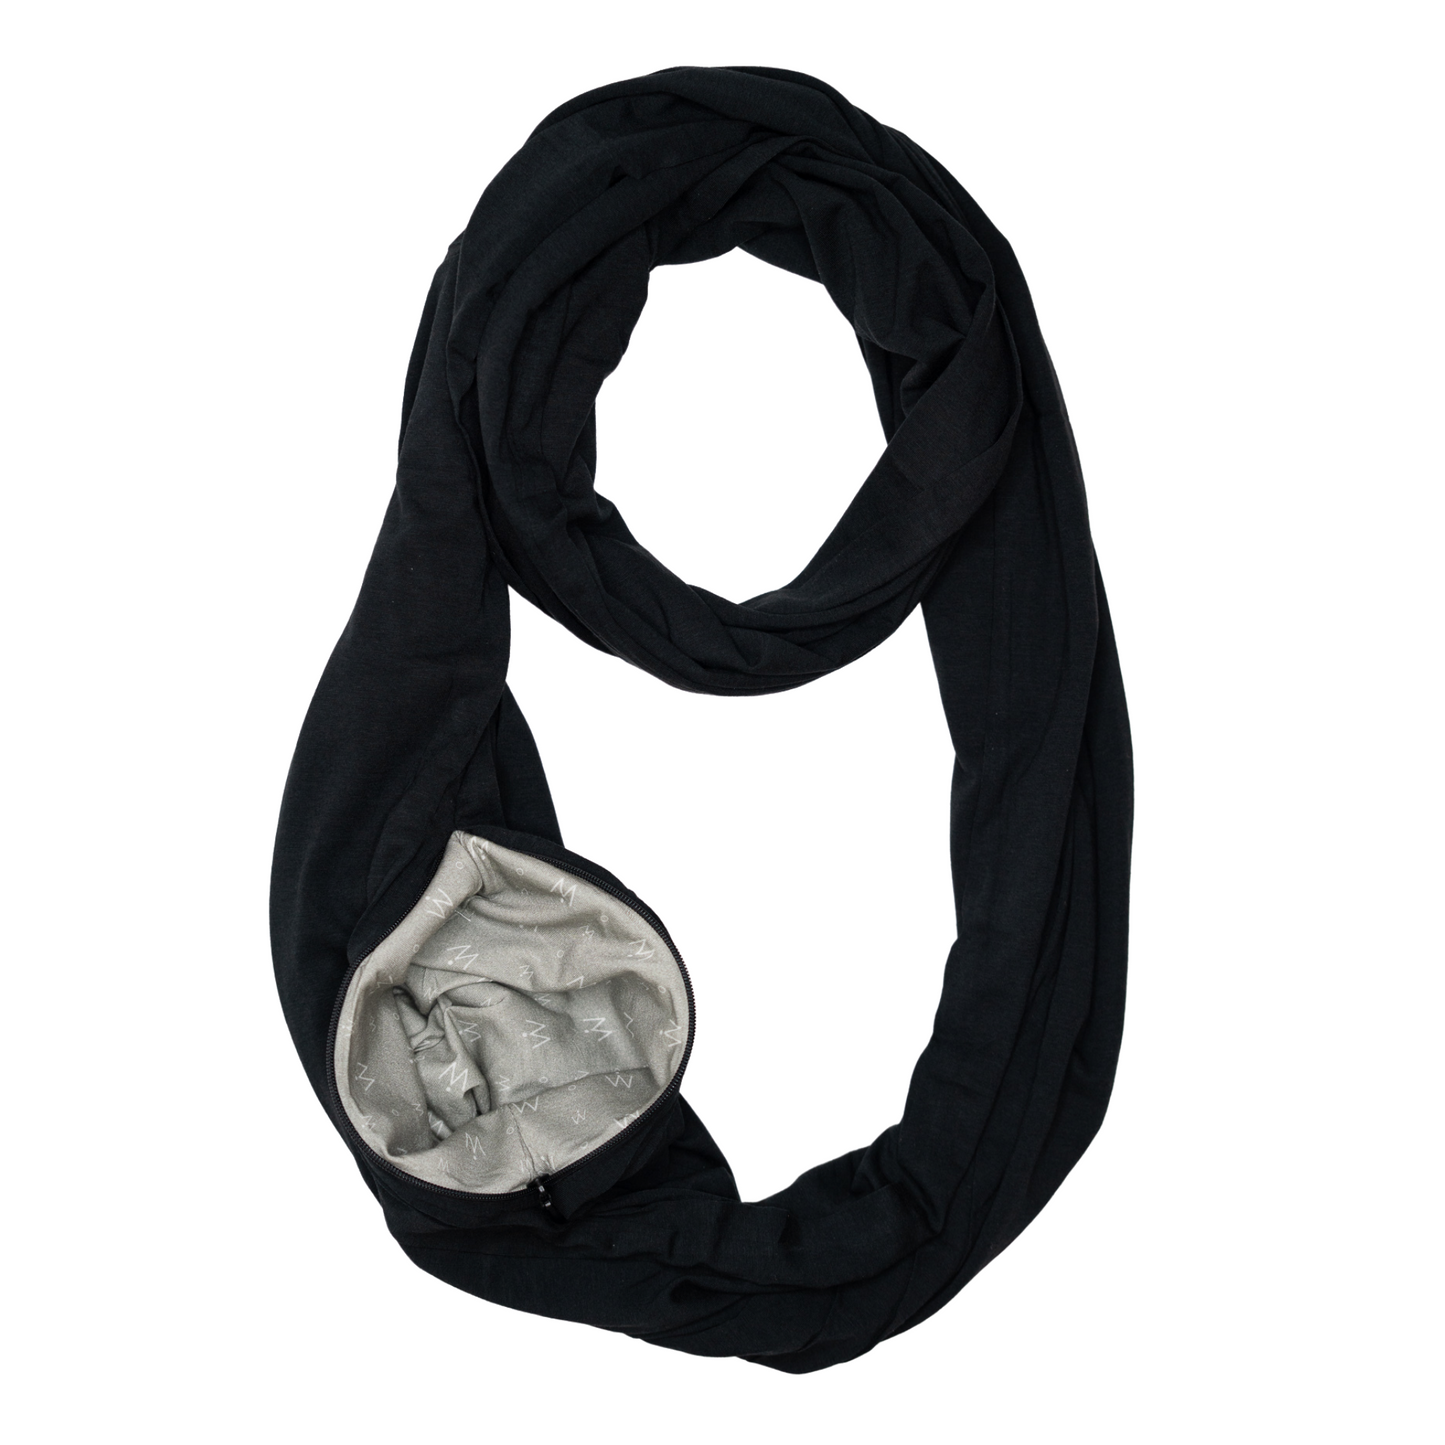 CARBON // Travel Scarf